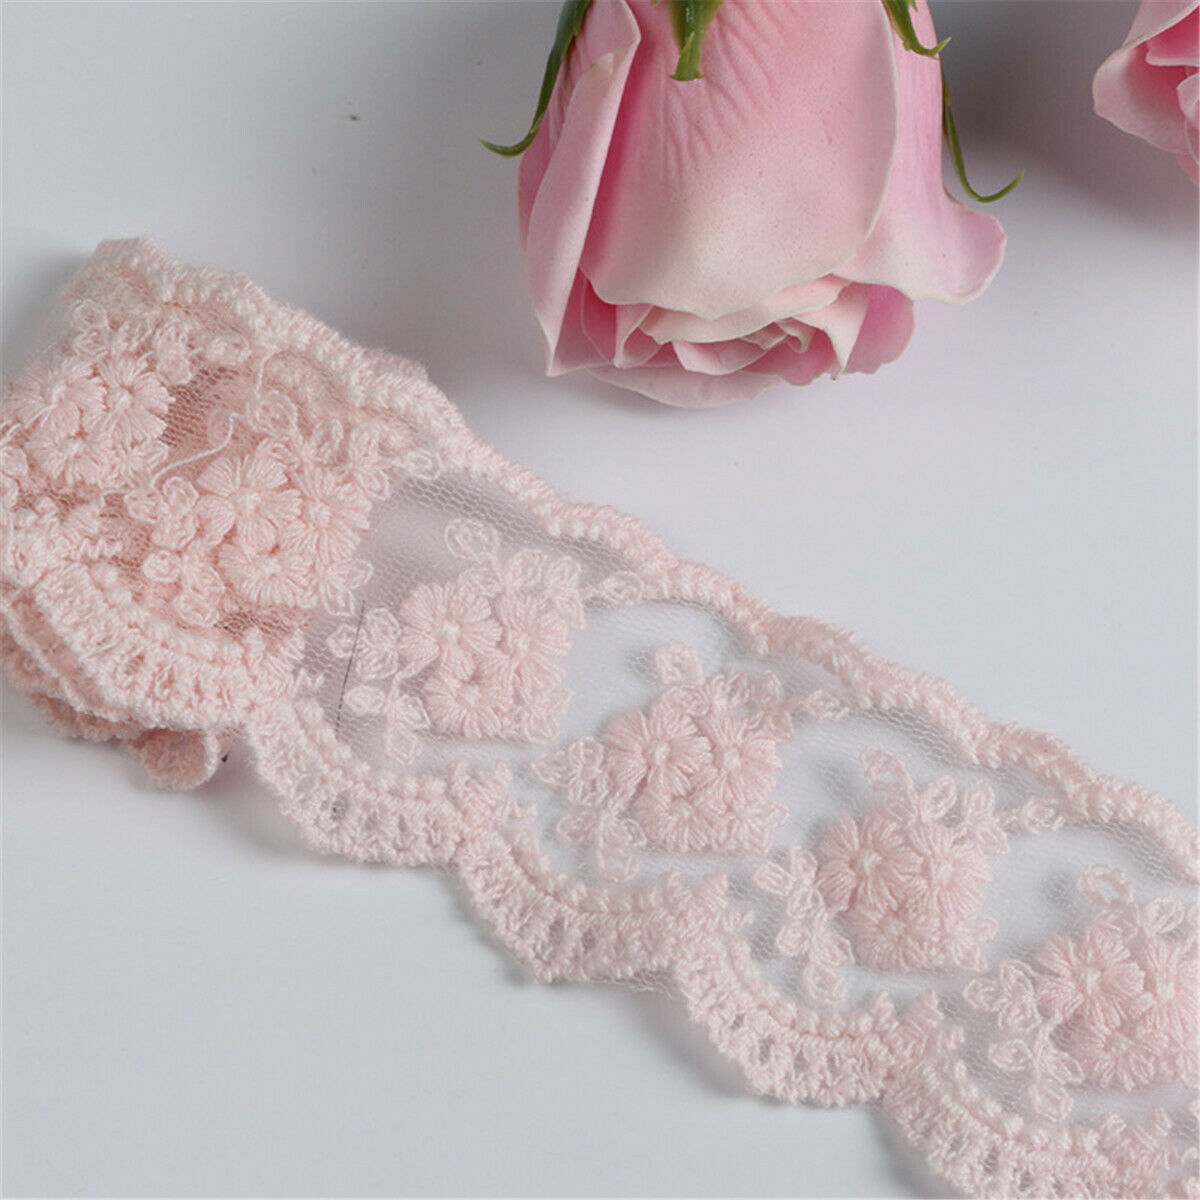 Embroidery Pink Floral Cotton Lace Trim Ribbon Wedding Dress Fabric Sewing Craft